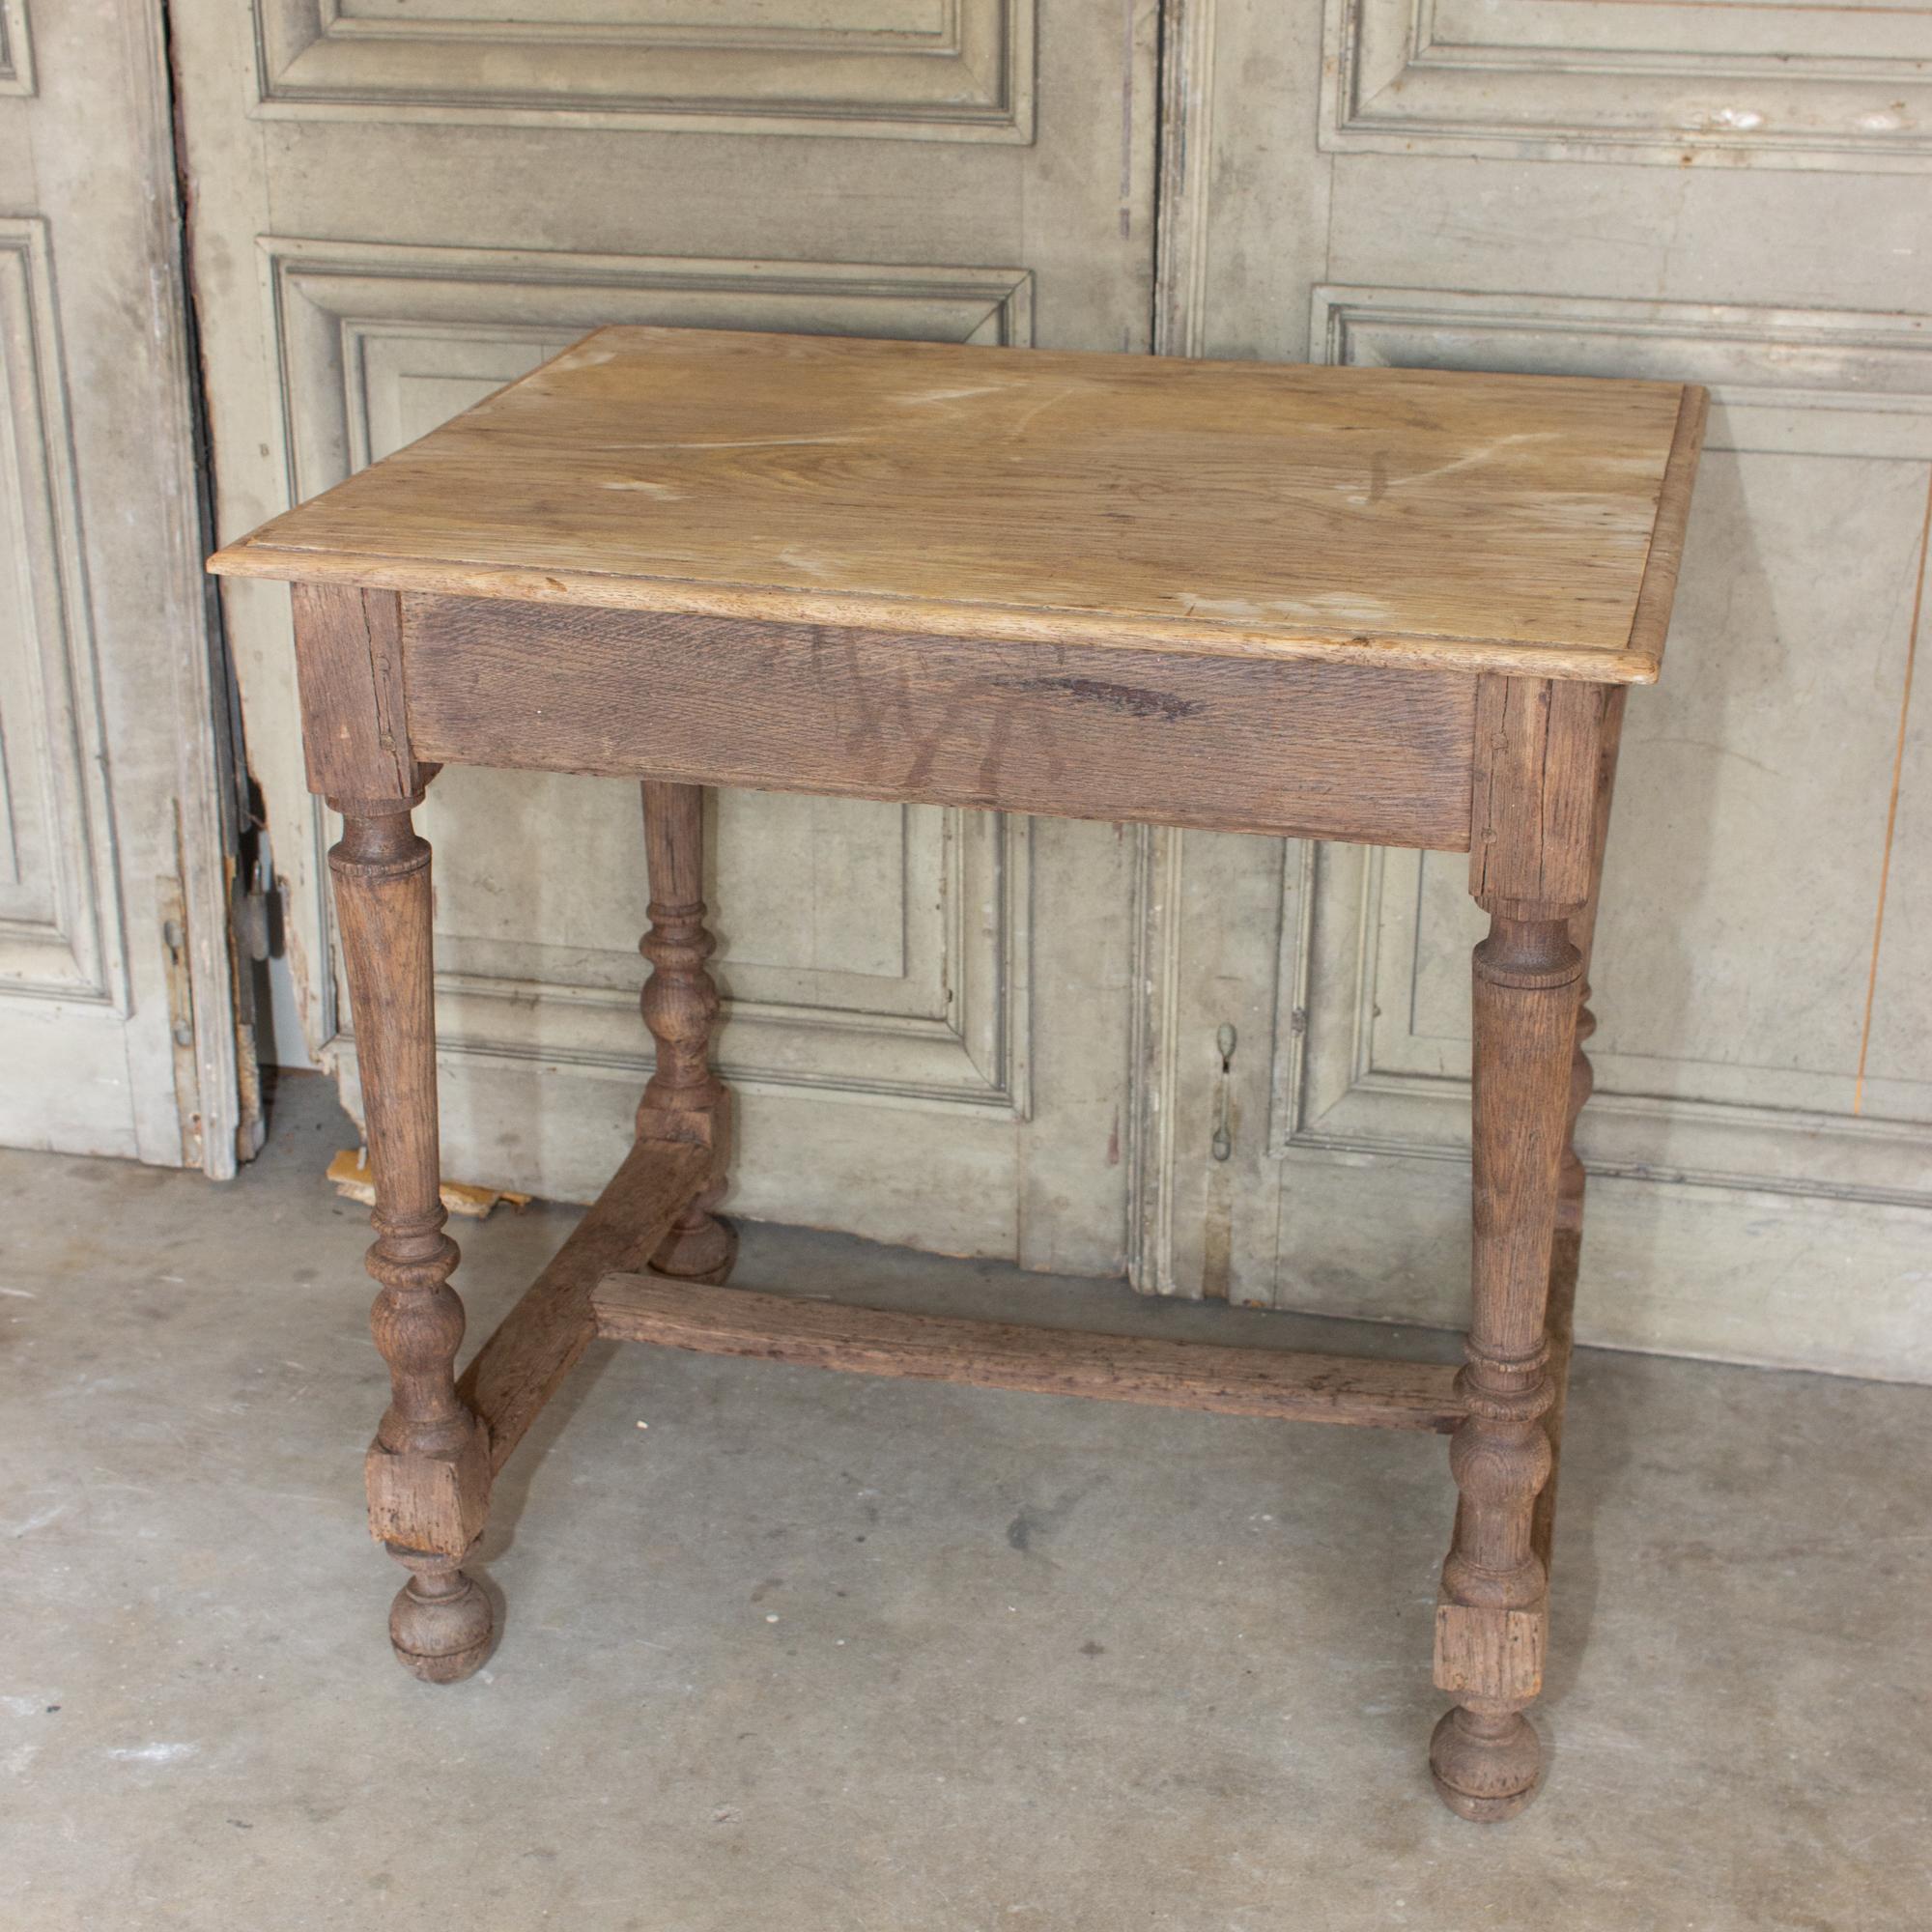 This antique French oak side table has a distressed finish with patination present, giving it a weathered and well-loved look. The legs feature turned details and a stretcher-style base with round, ball-feet. There is no storage in the table, but